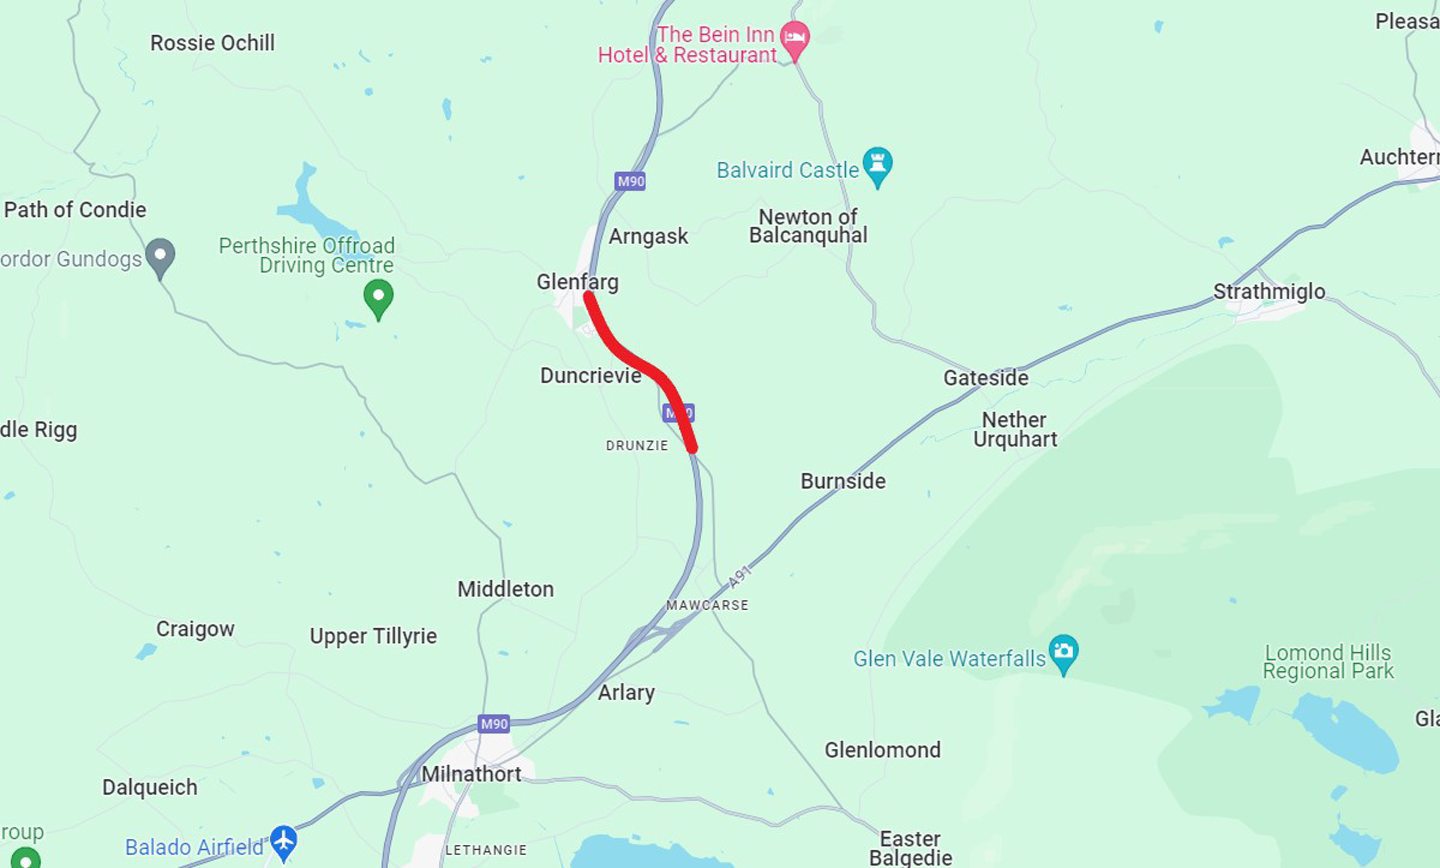 The roadworks map